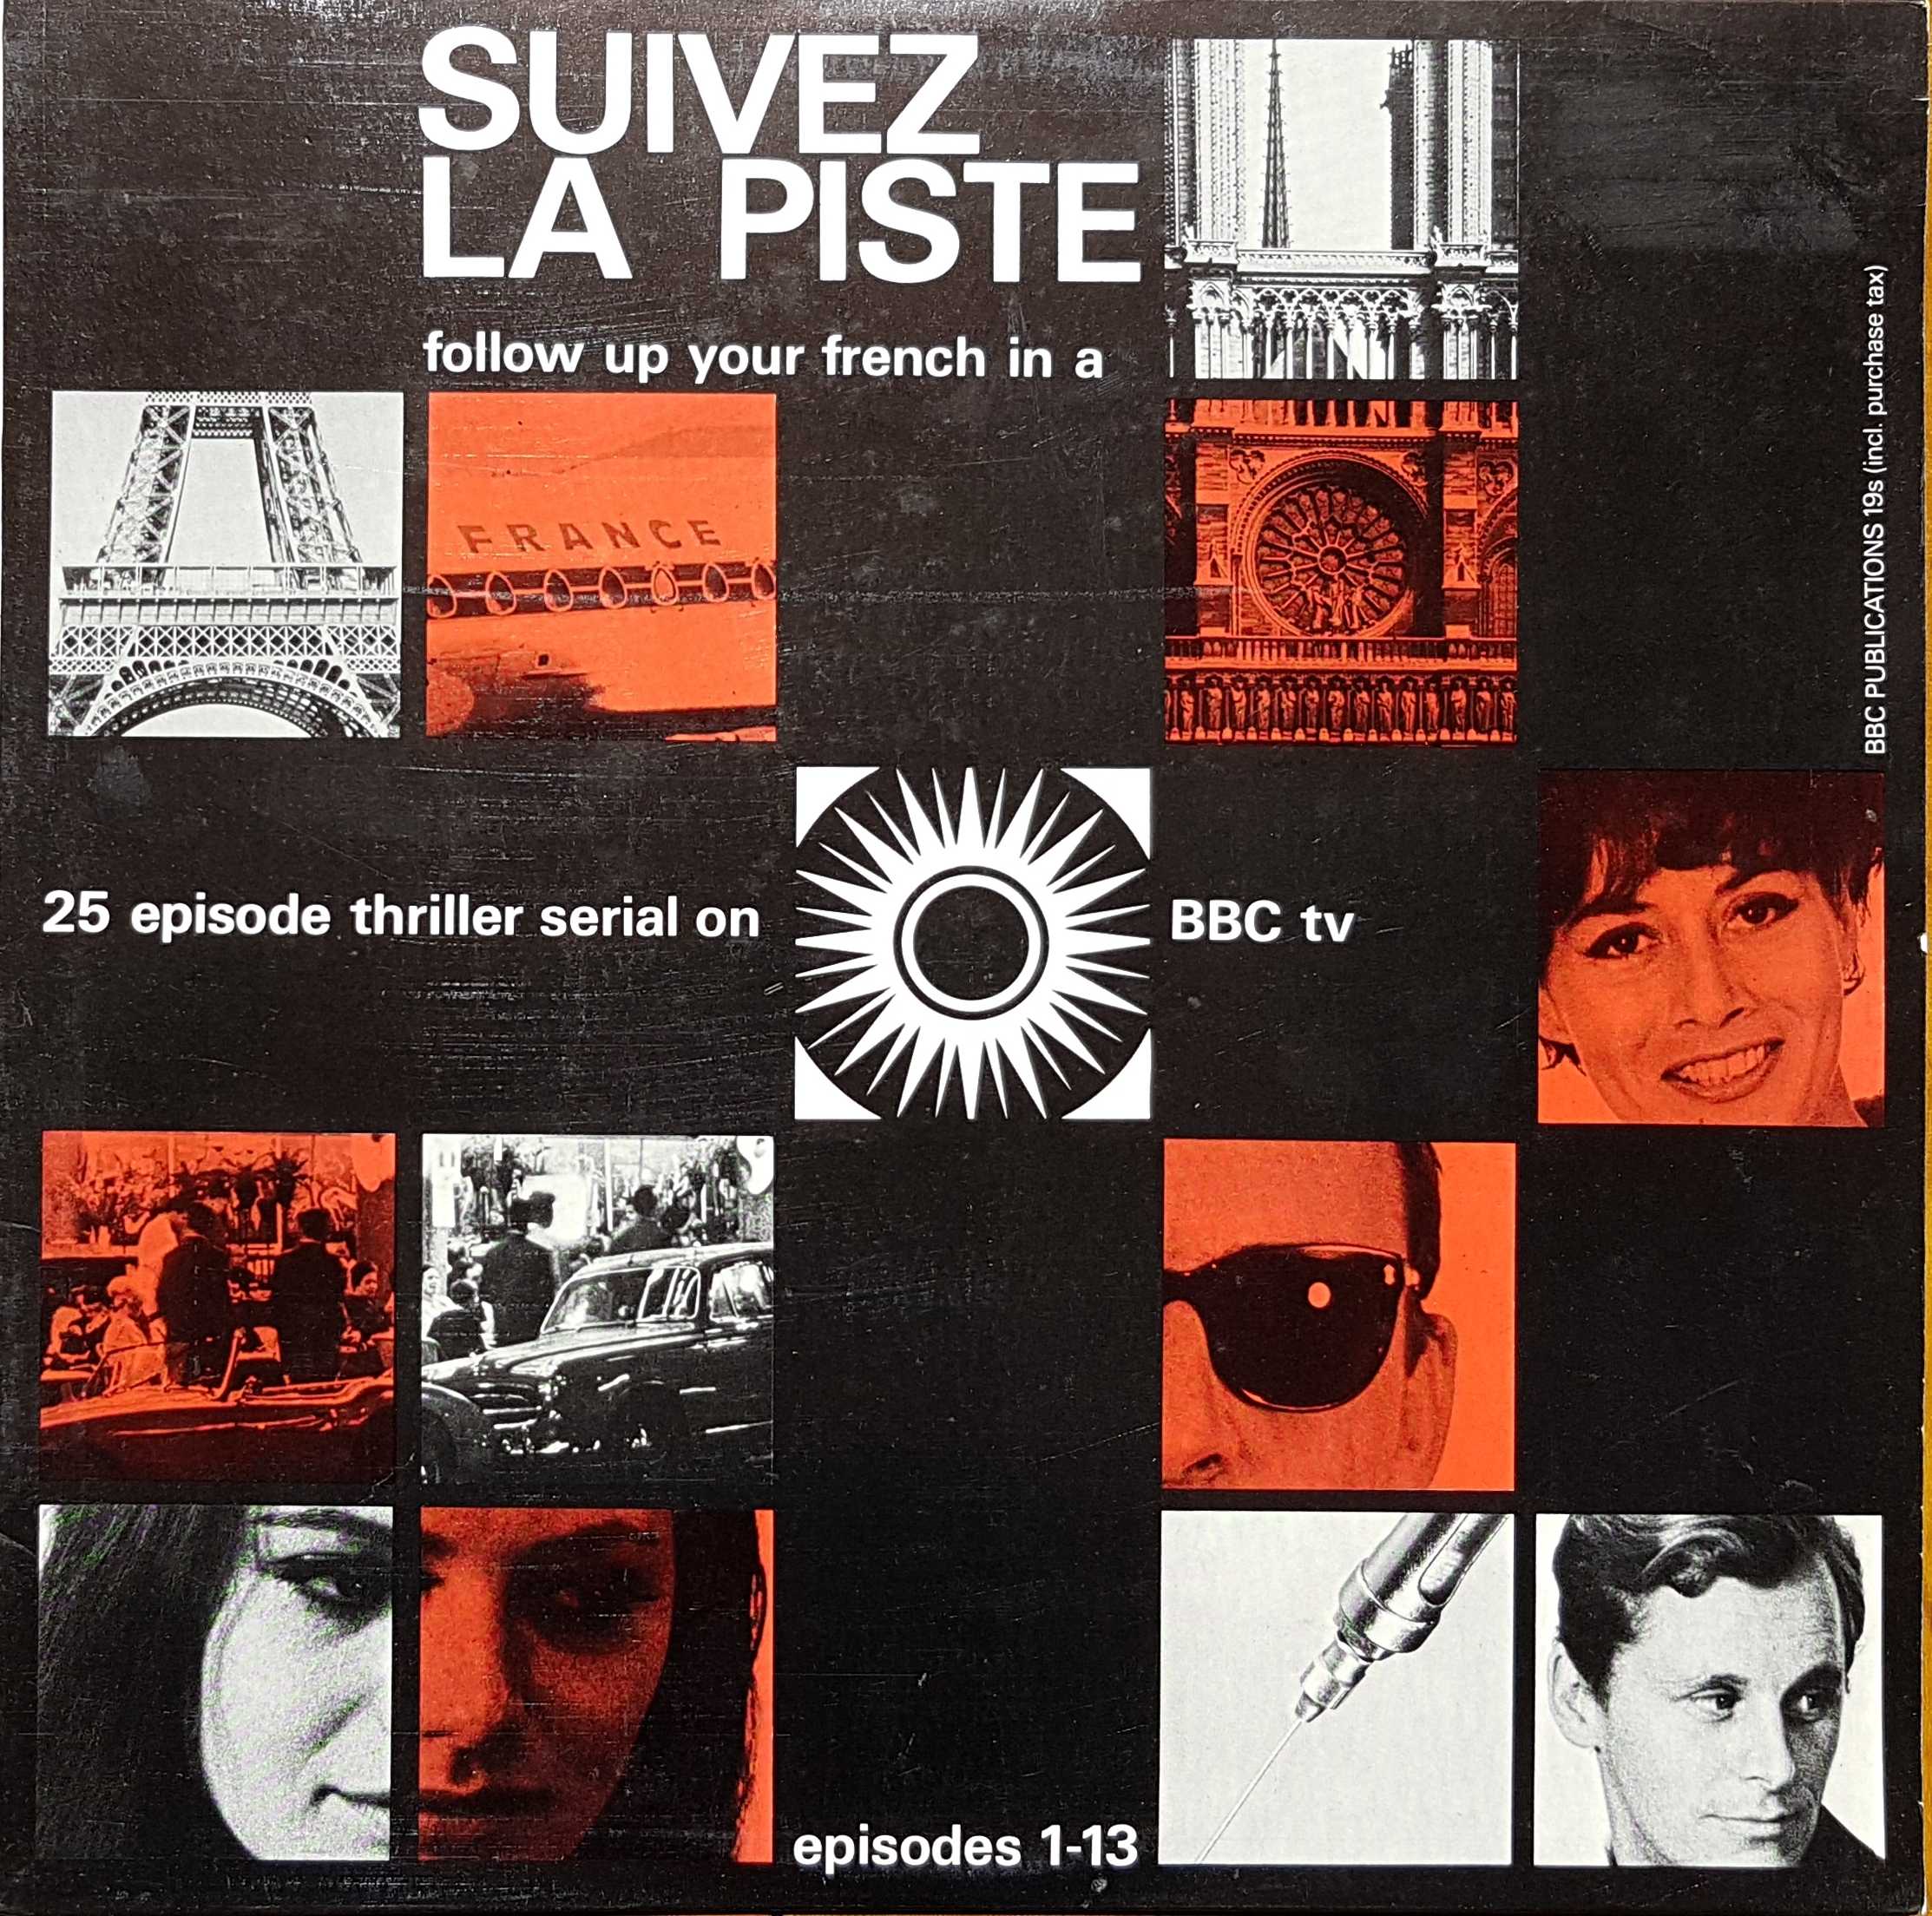 Picture of OP 47/48 Suivez la piste - Follow up your French in a 25 episode thriller serial on BBC tv - Episodes 1 - 13 by artist Emile De Harven / Michel Blanc / Denys Player / John Trim from the BBC albums - Records and Tapes library